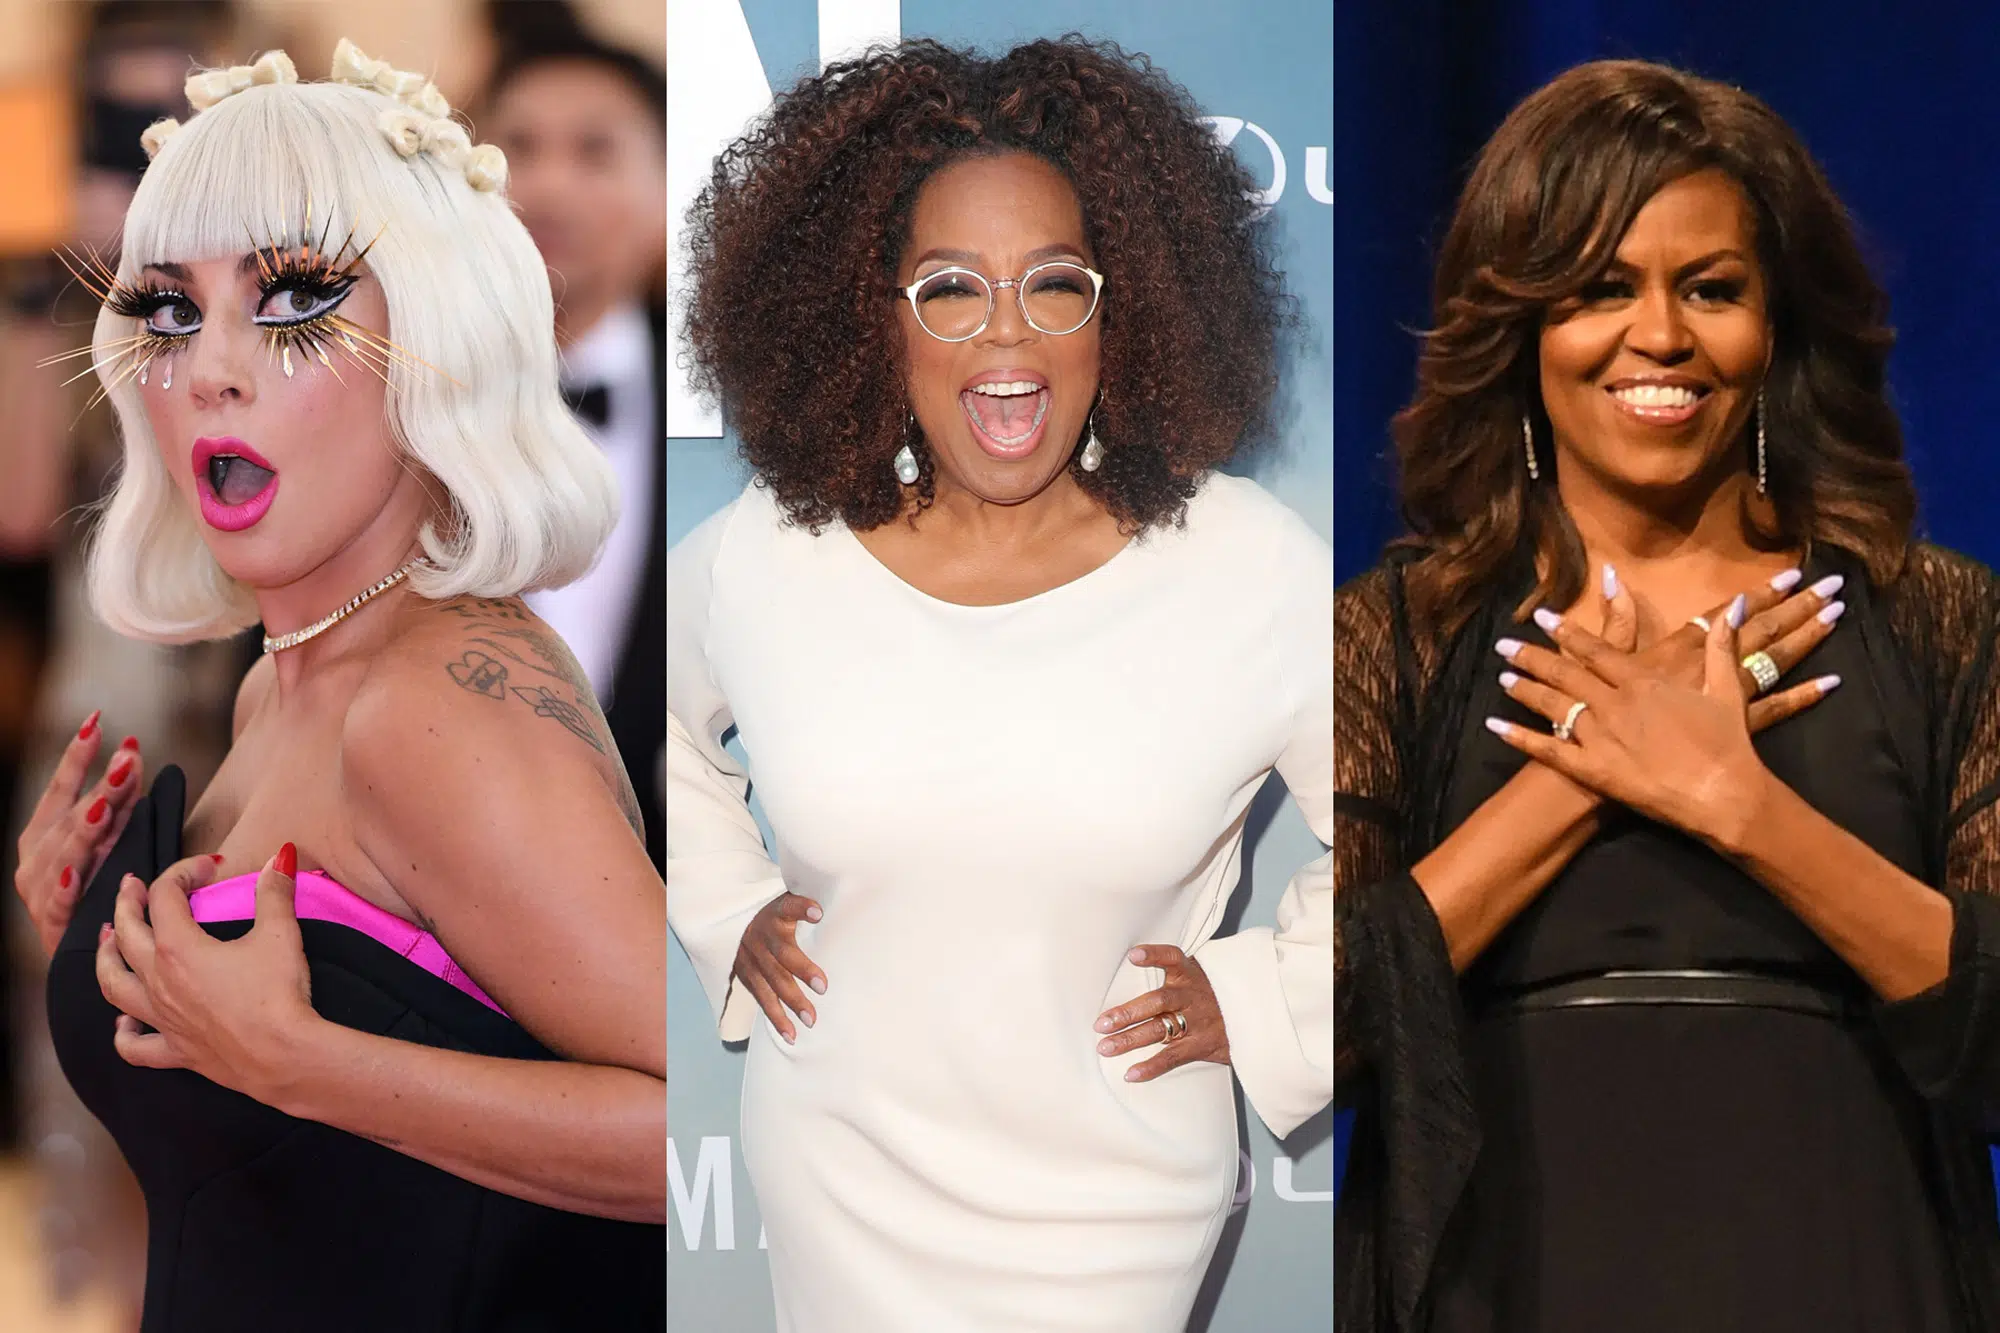 Oprah Winfrey to Go on Star-Studded 2020 Vision Tour with Tina Fey, Lady Gaga and More